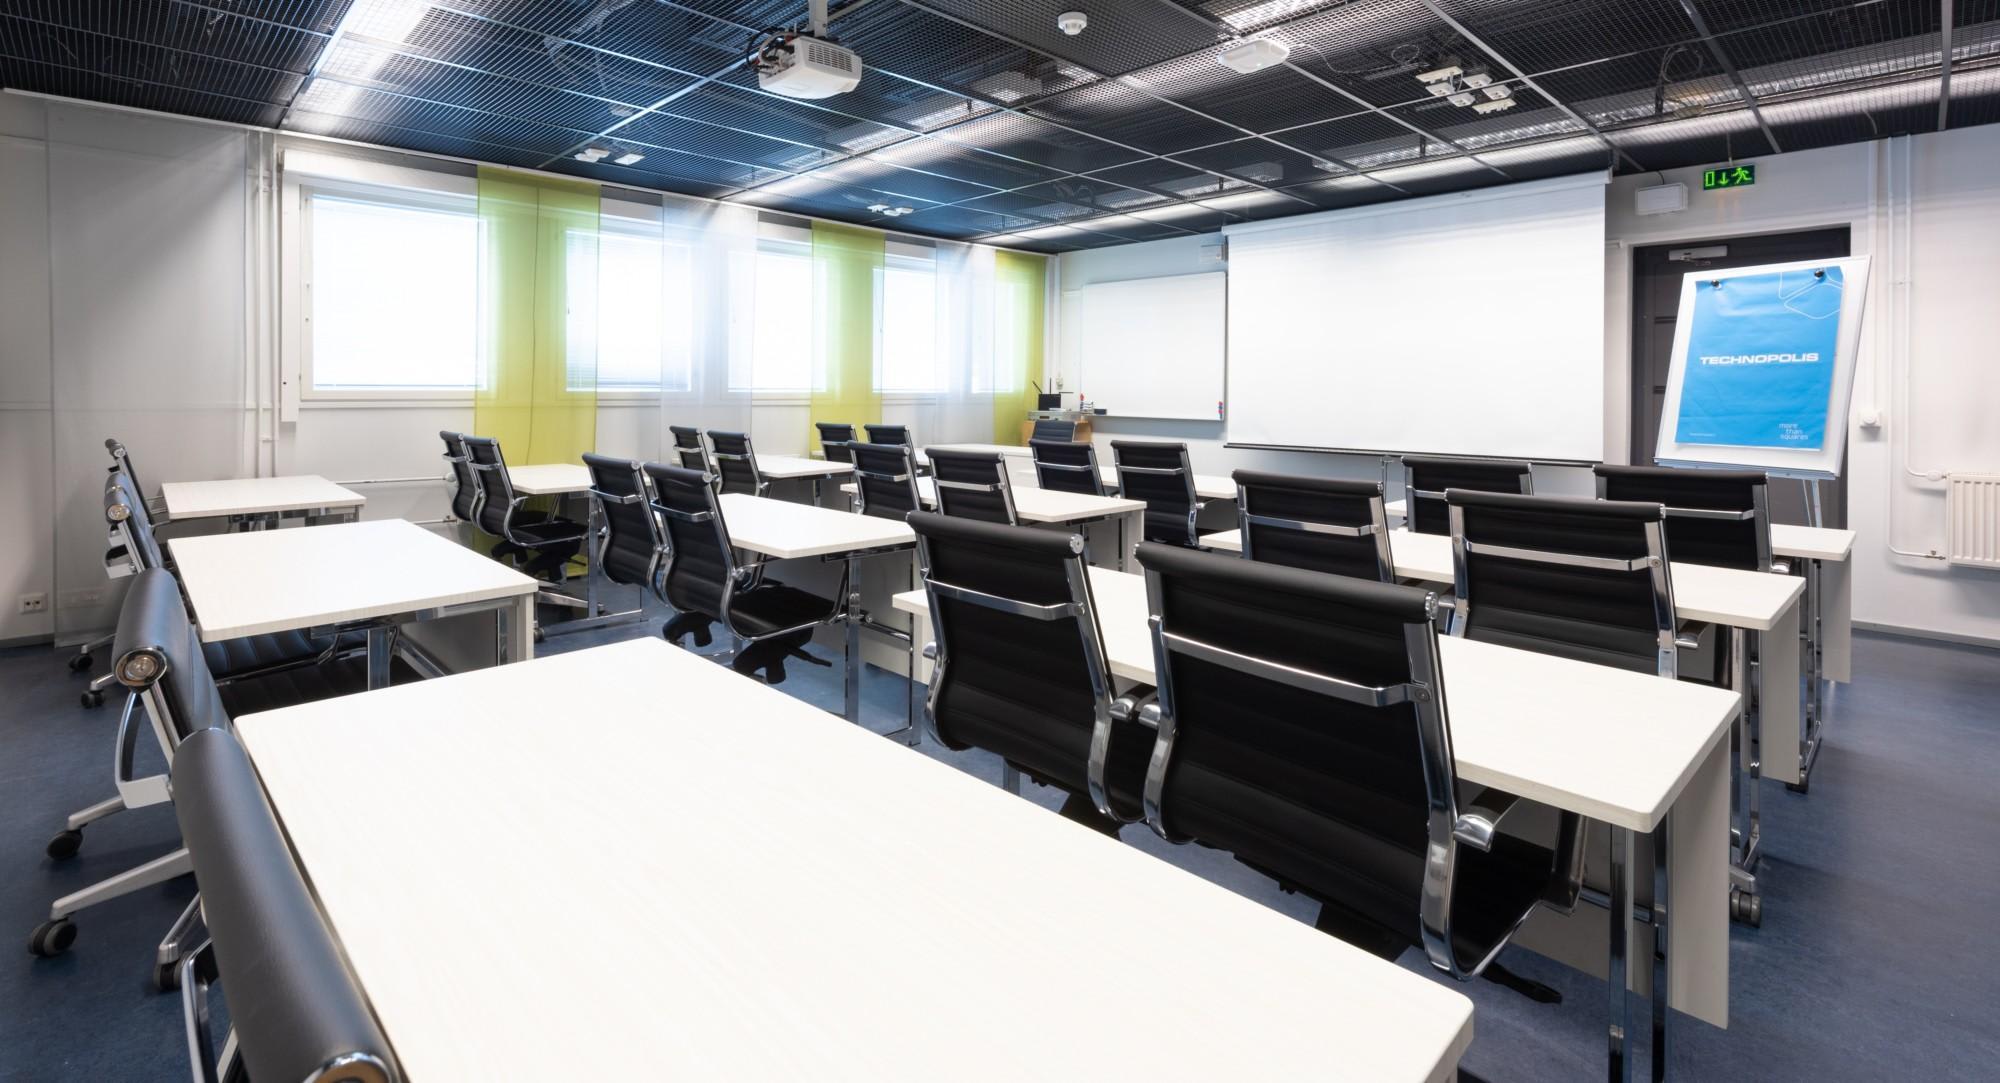 Class room for 24 persons. The room is equipped with projector, speakers, whiteboard, flip chart, high speed Wi-Fi and office equipment.